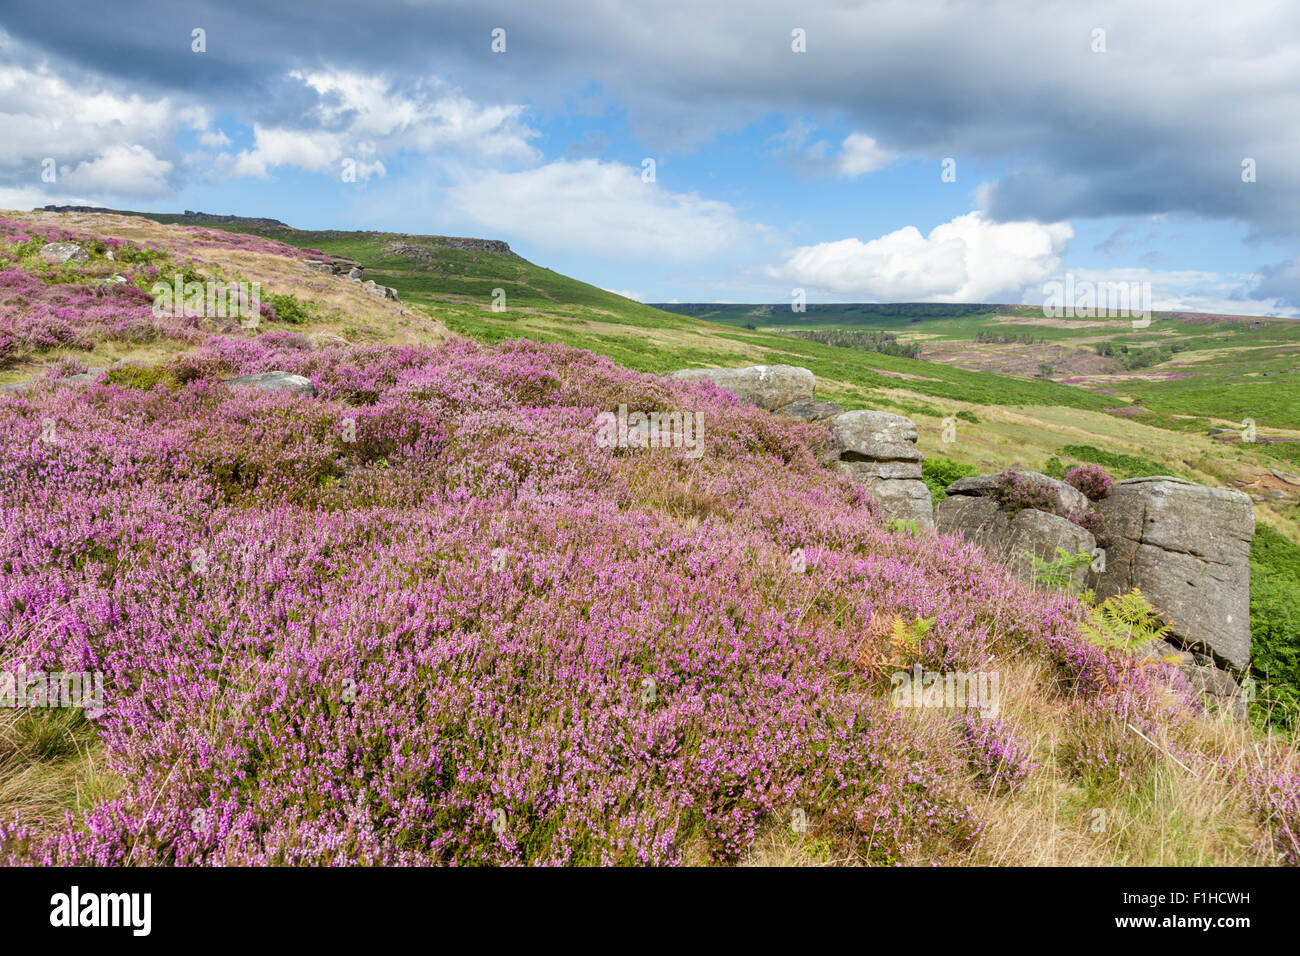 Heather on moorland in the English countryside. Hathersage Moor, Derbyshire Yorkshire border, Peak District, England, UK Stock Photo